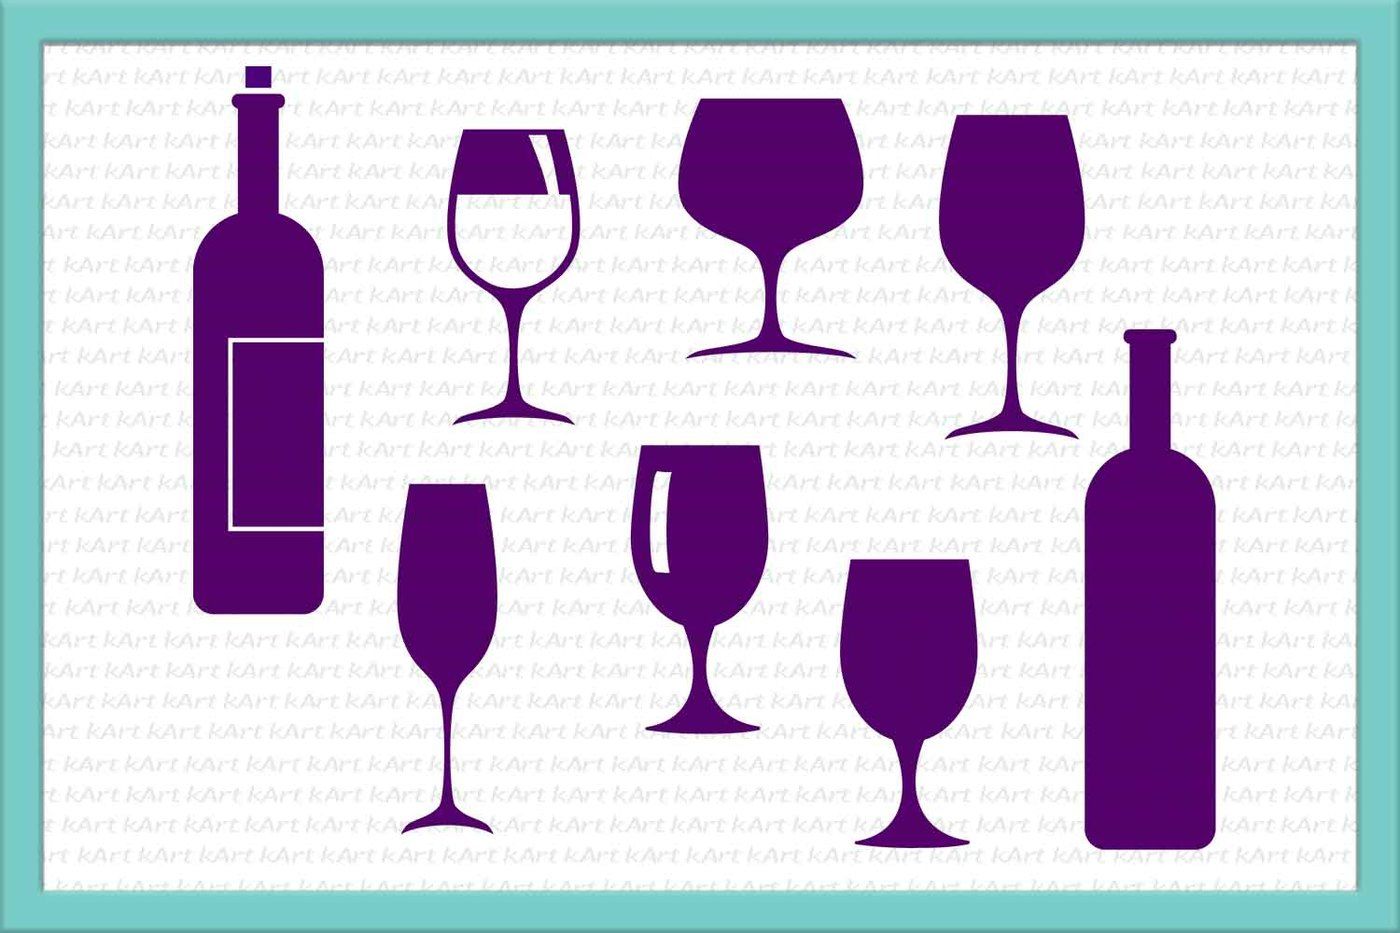 wine bottle and glass clip art